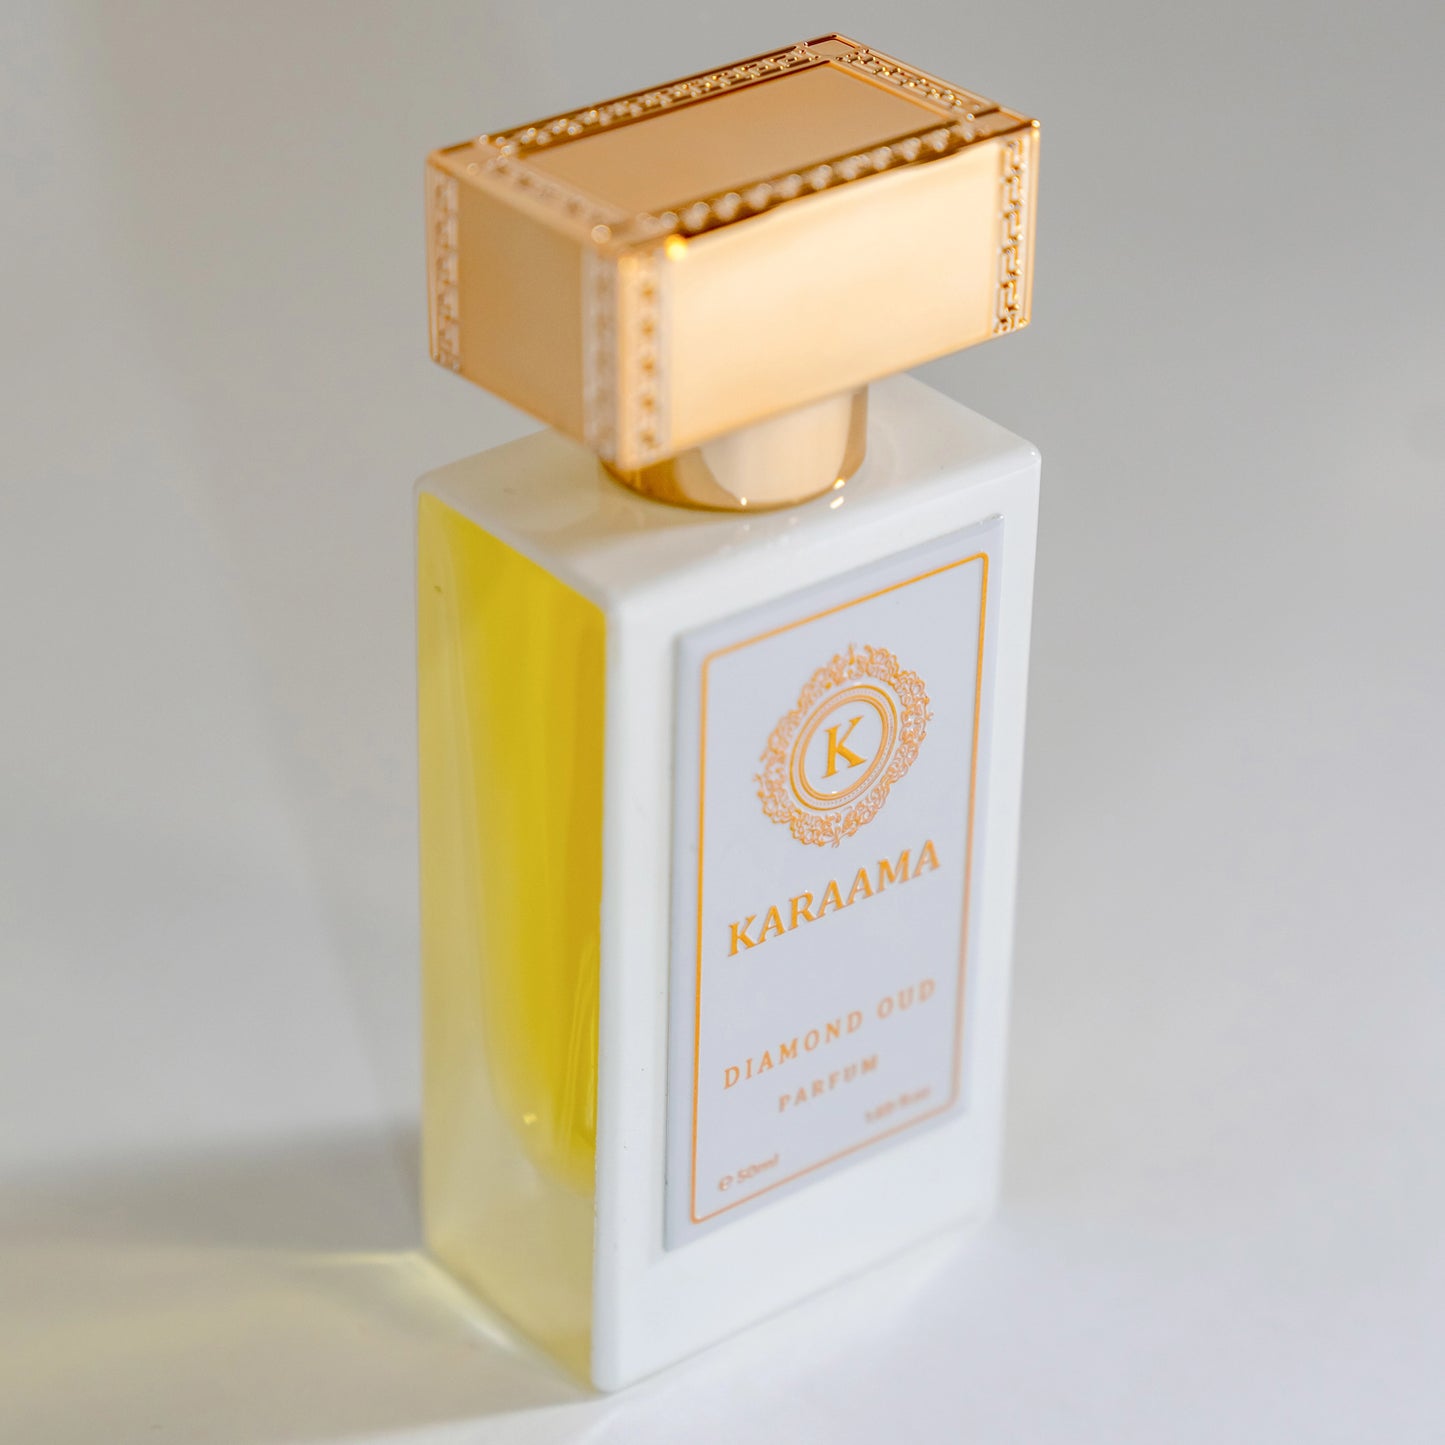 Elegant KARAAMA Diamond Oud perfume bottle with a luxurious gold cap, showcasing an exquisite, trending fragrance. Perfect for scent enthusiasts seeking a popular, professional appeal. #LuxuryFragrance #Perfume #TrendingScent #EleganceInABottle